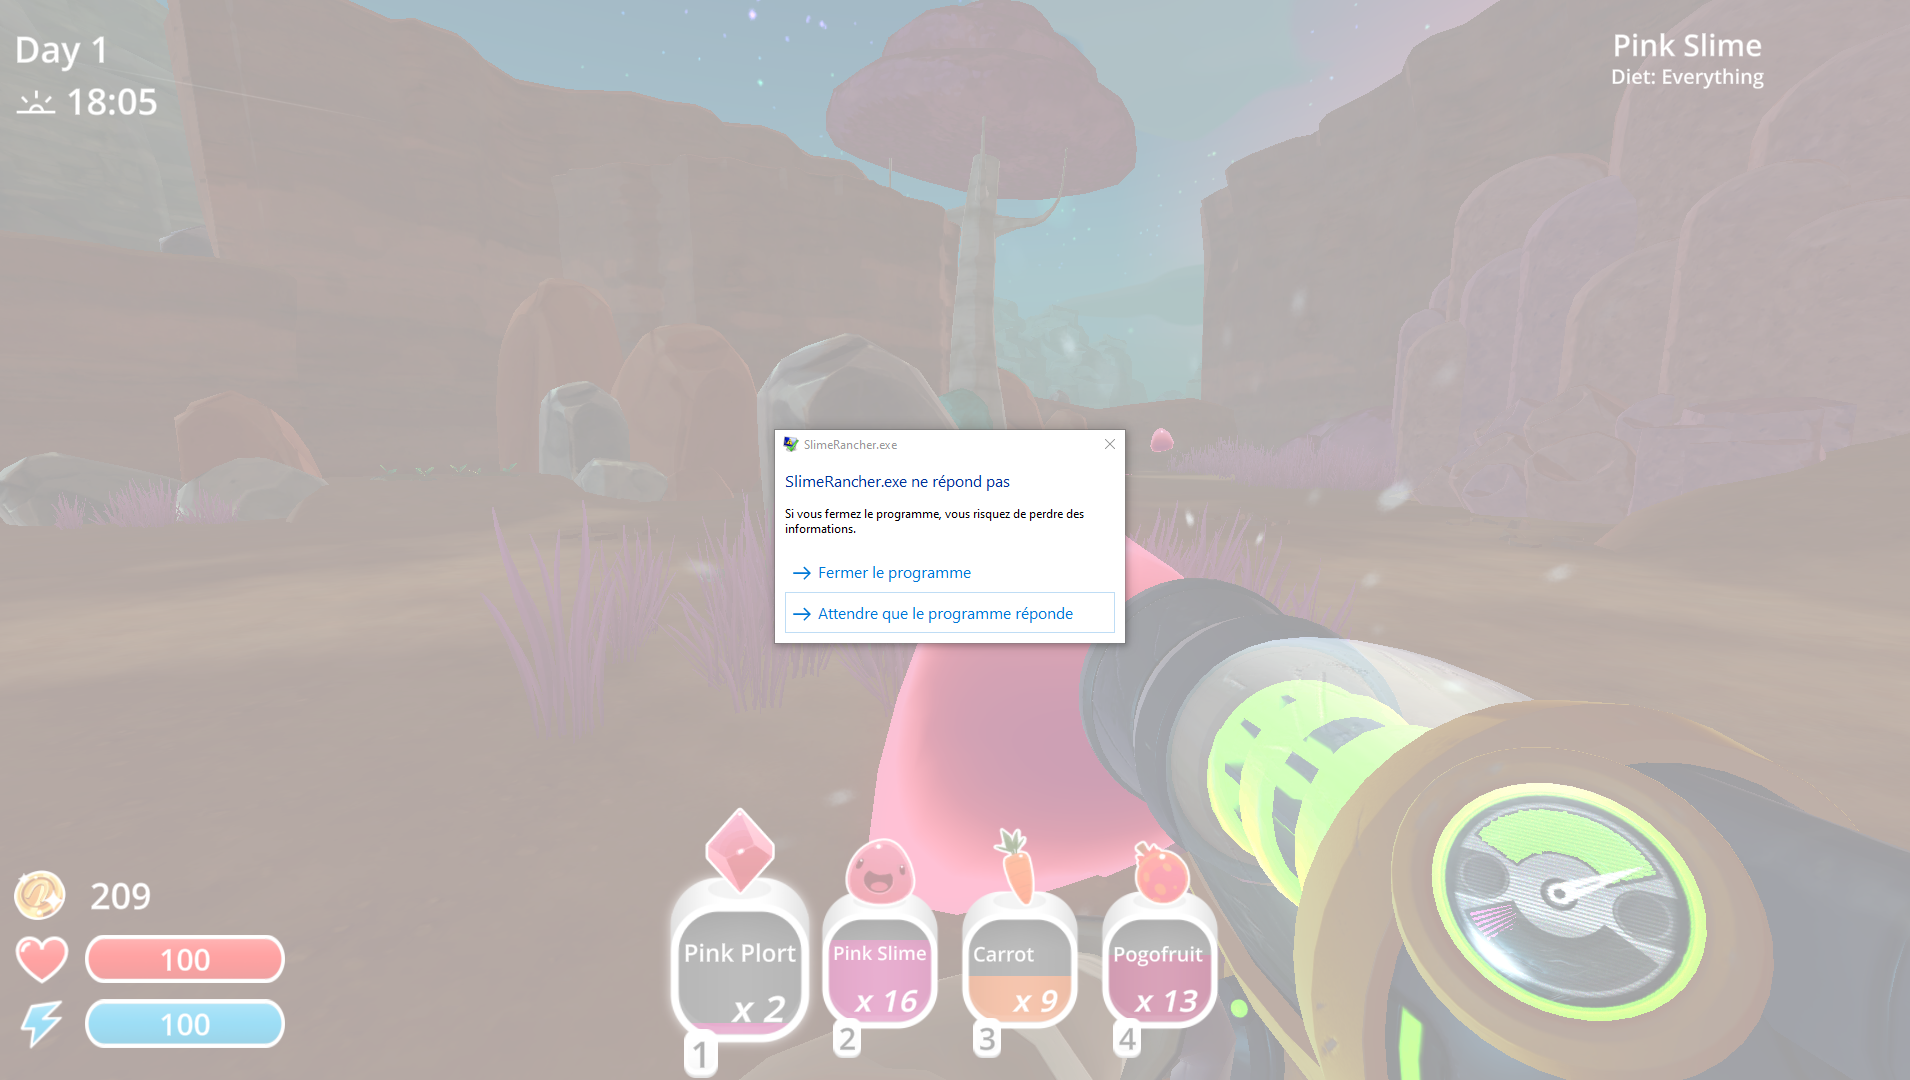 Slime Rancher multiplayer – is it possible?